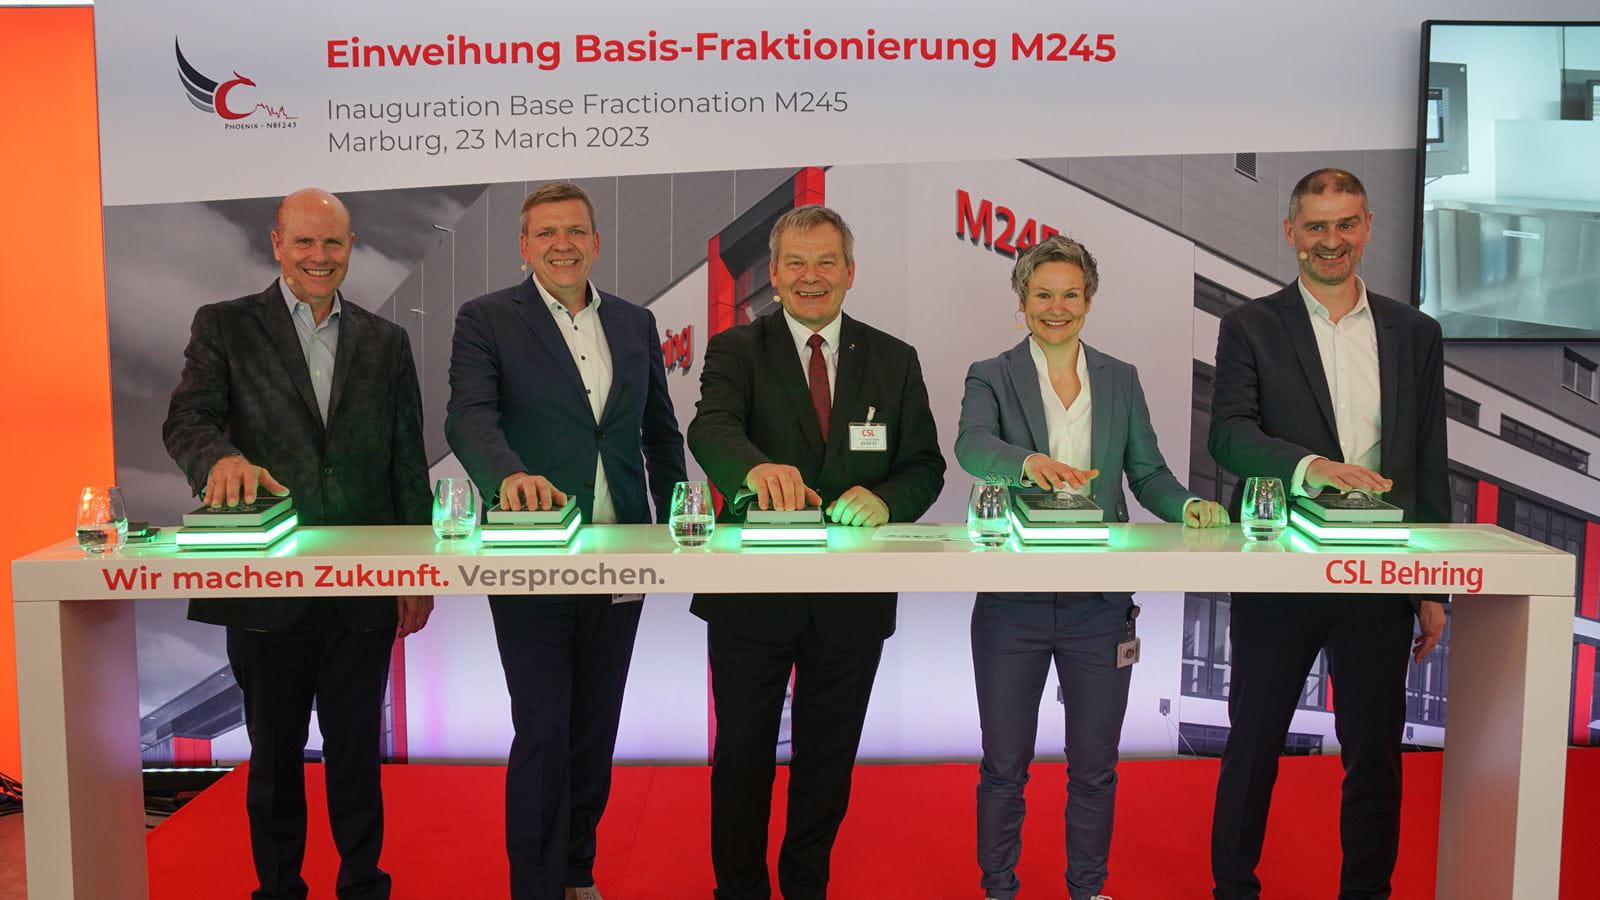  The base fractionation in Marburg, “Phoenix” has been solemnly opened